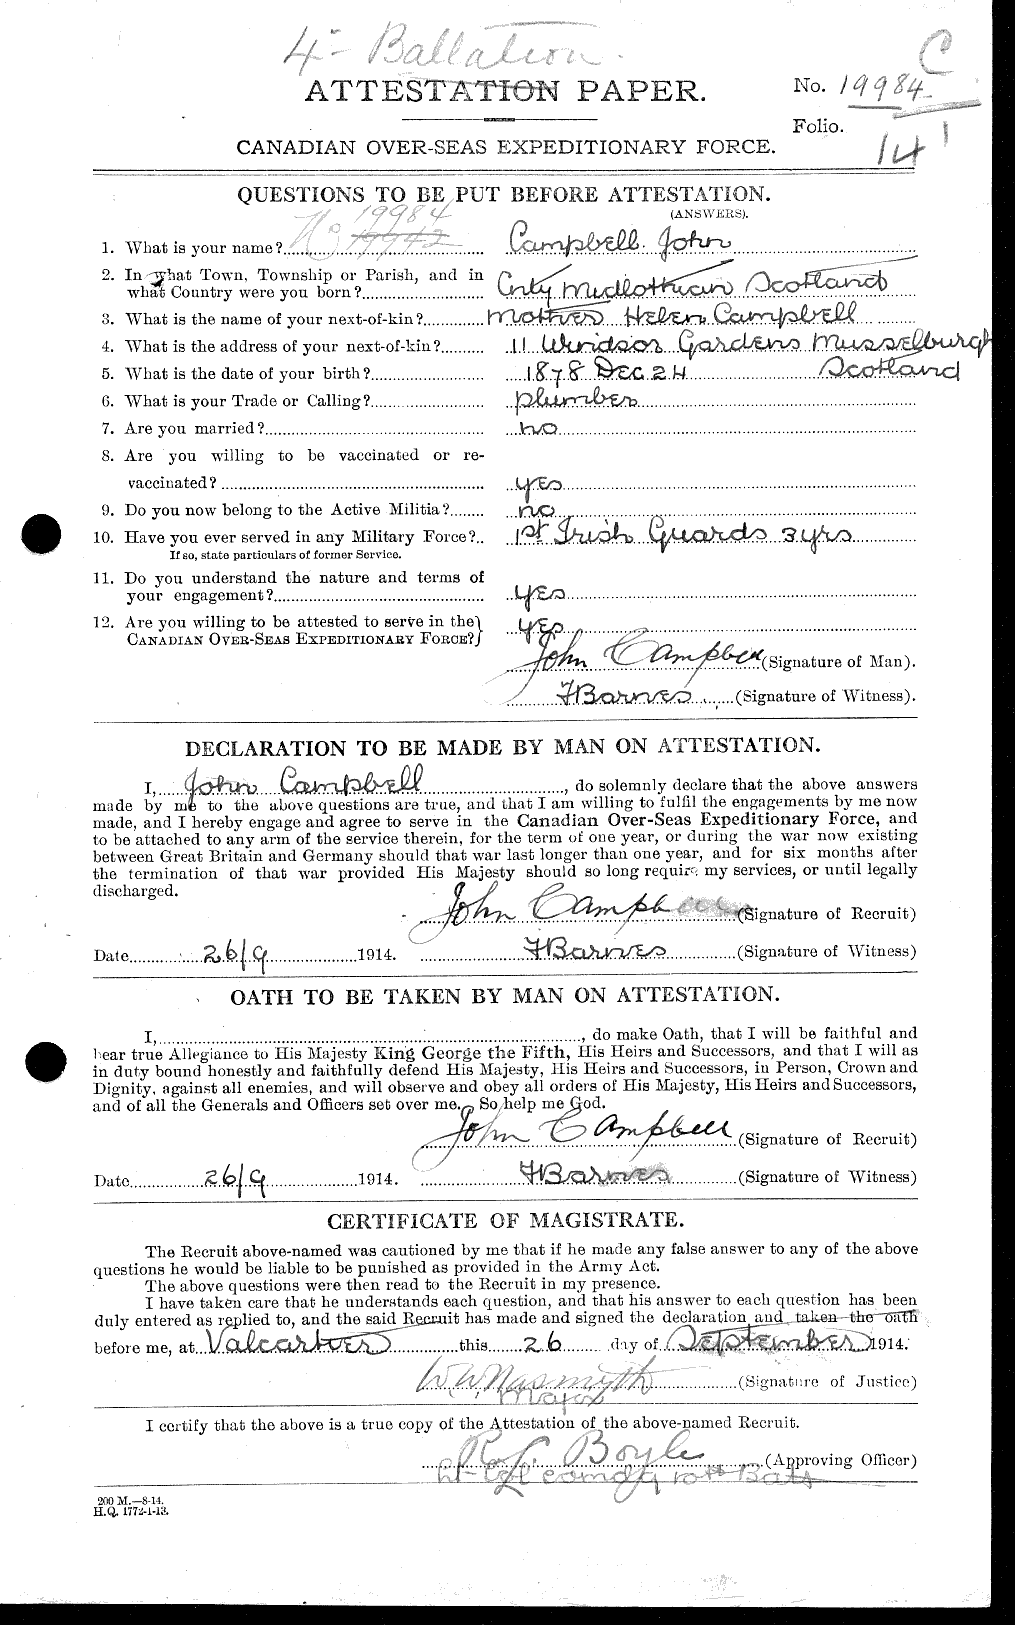 Personnel Records of the First World War - CEF 006796a